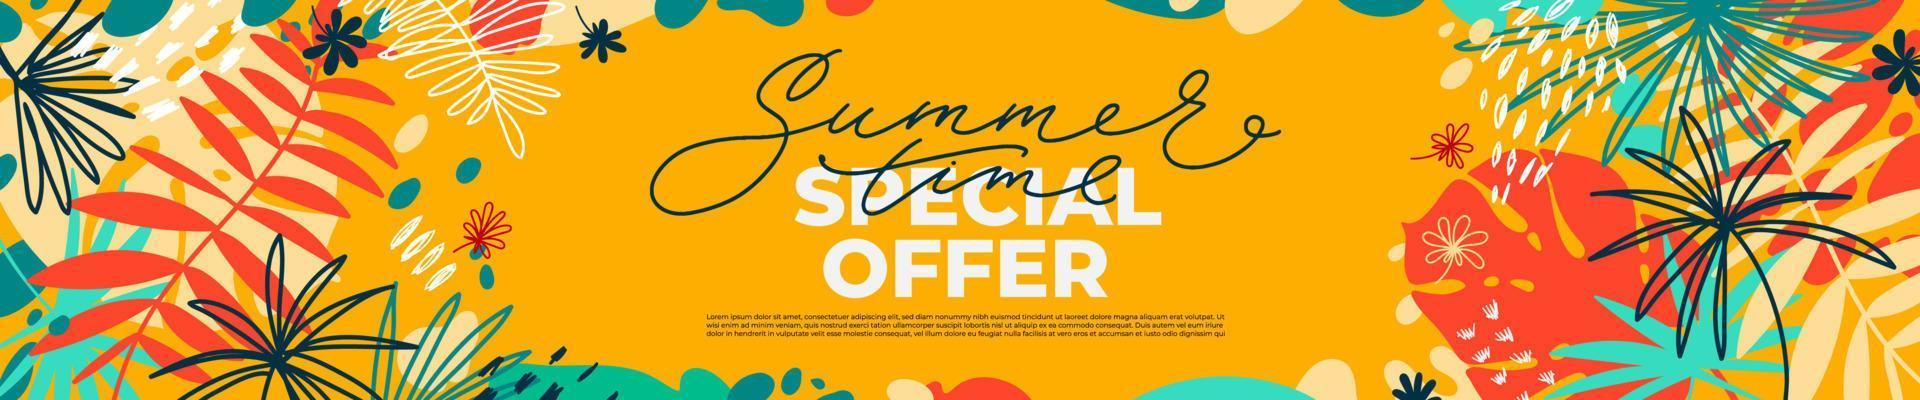 Summer time special offer horizontal banner with tropical leaves and flat elements. Vector template for sales, promo, ads. Bright floral vector illustration with text blocks.